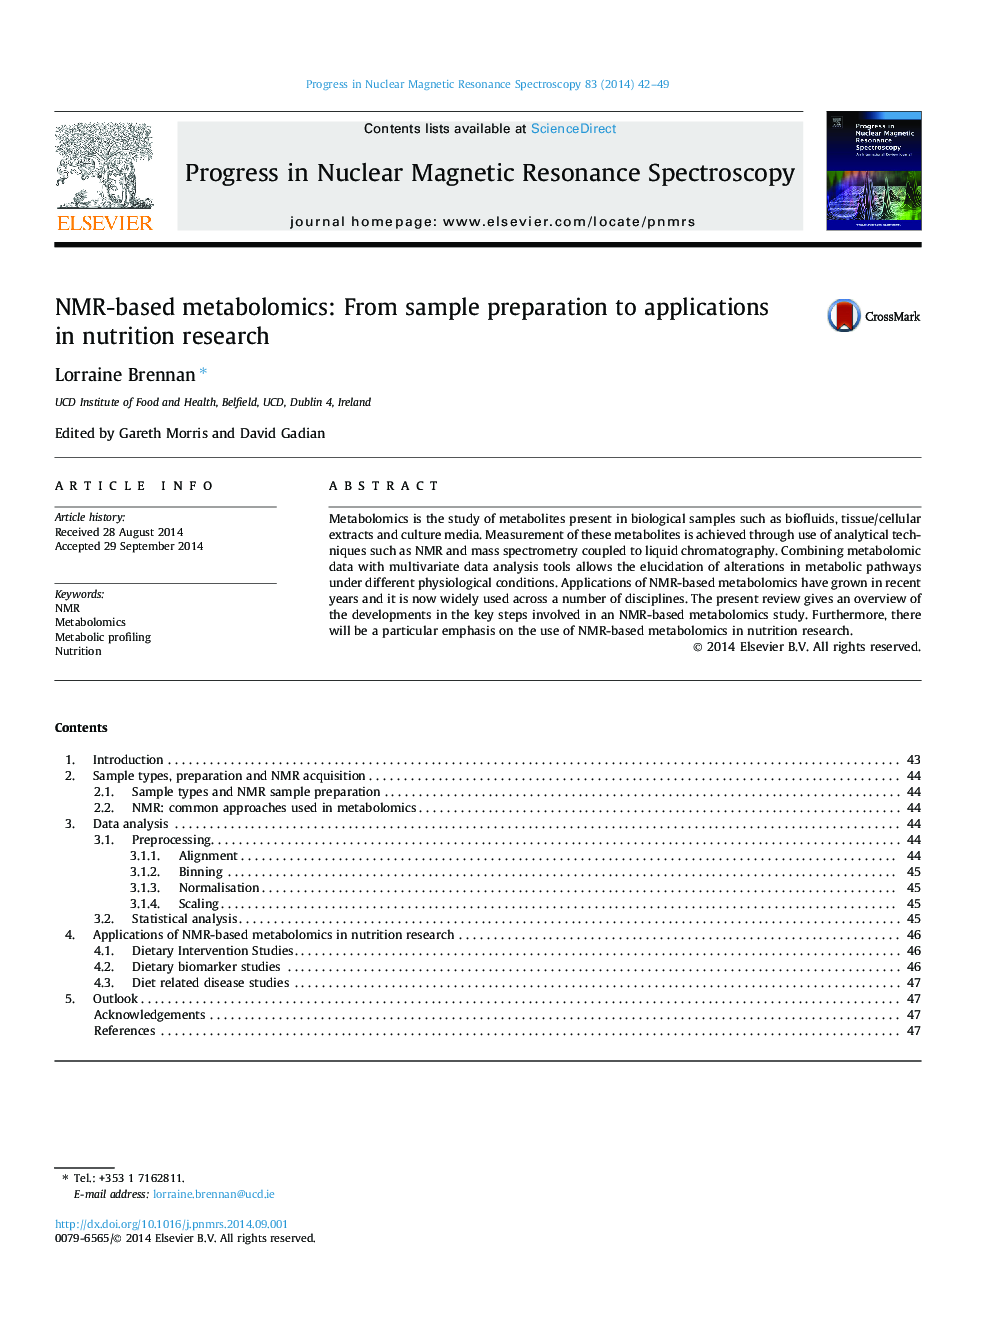 NMR-based metabolomics: From sample preparation to applications in nutrition research